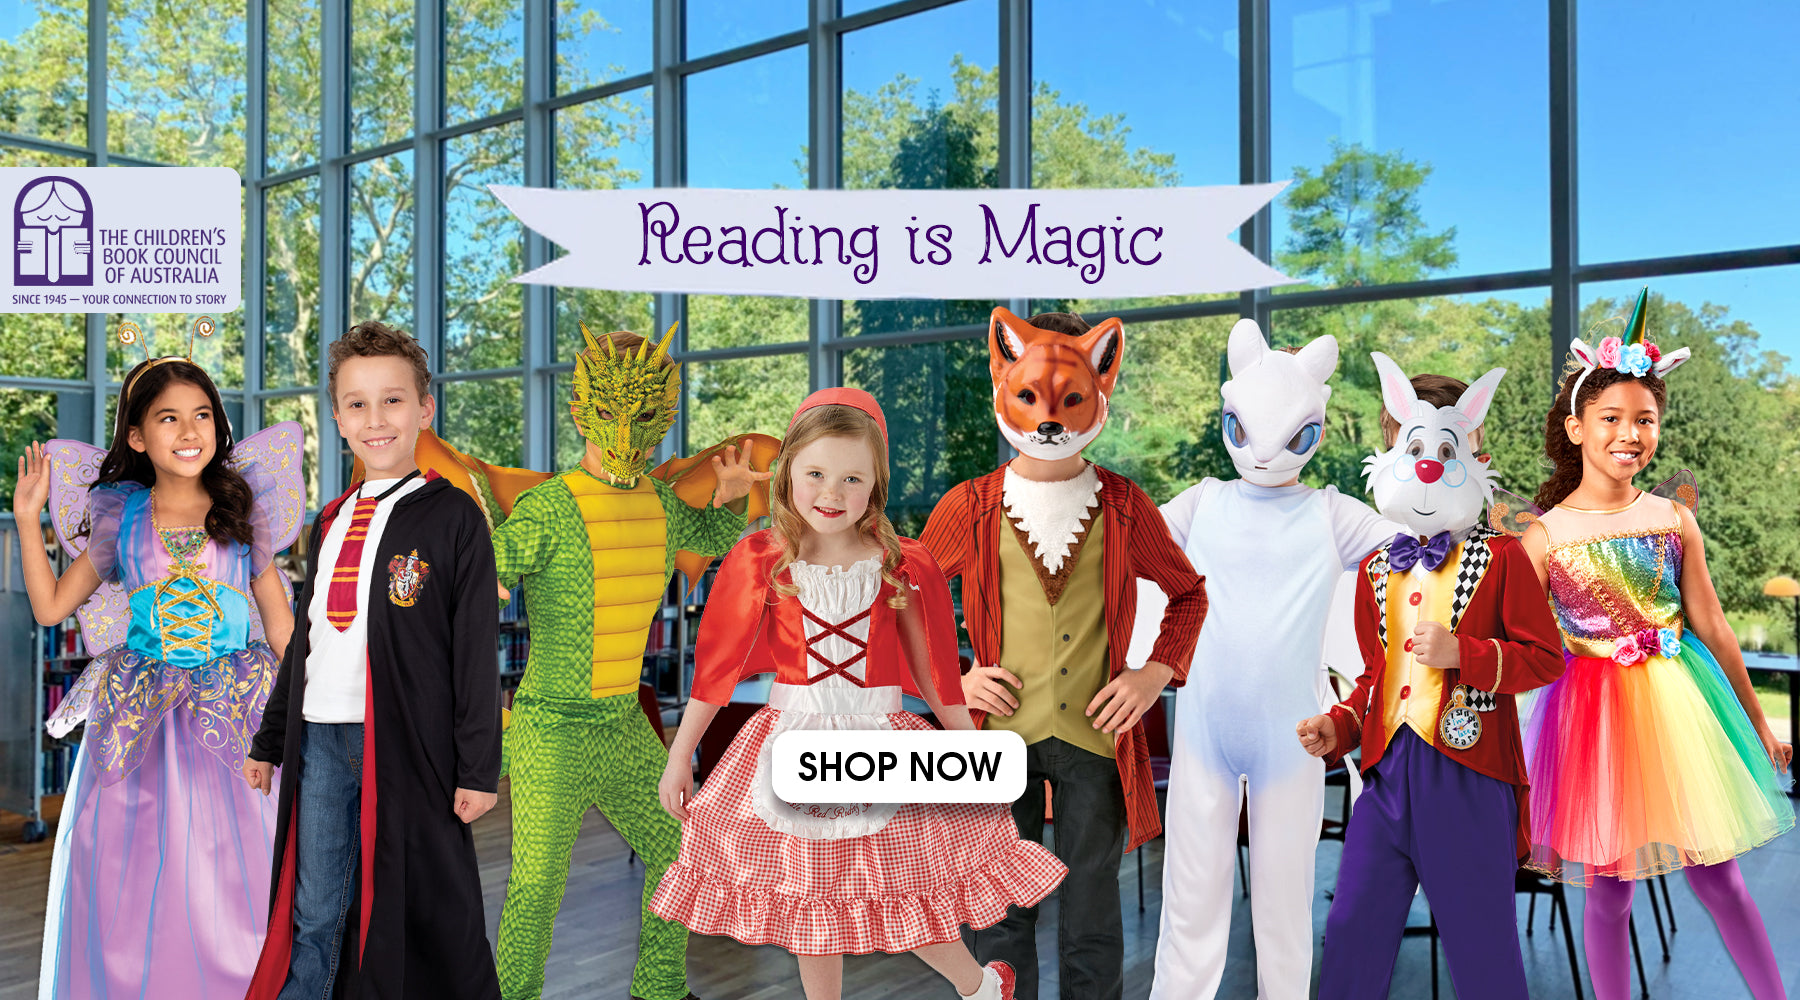 Get your book week 2024 Reading is Magic costumes sorted early at Costume Super Centre Australia. We have a huge range of book week costumes for kids and teachers!